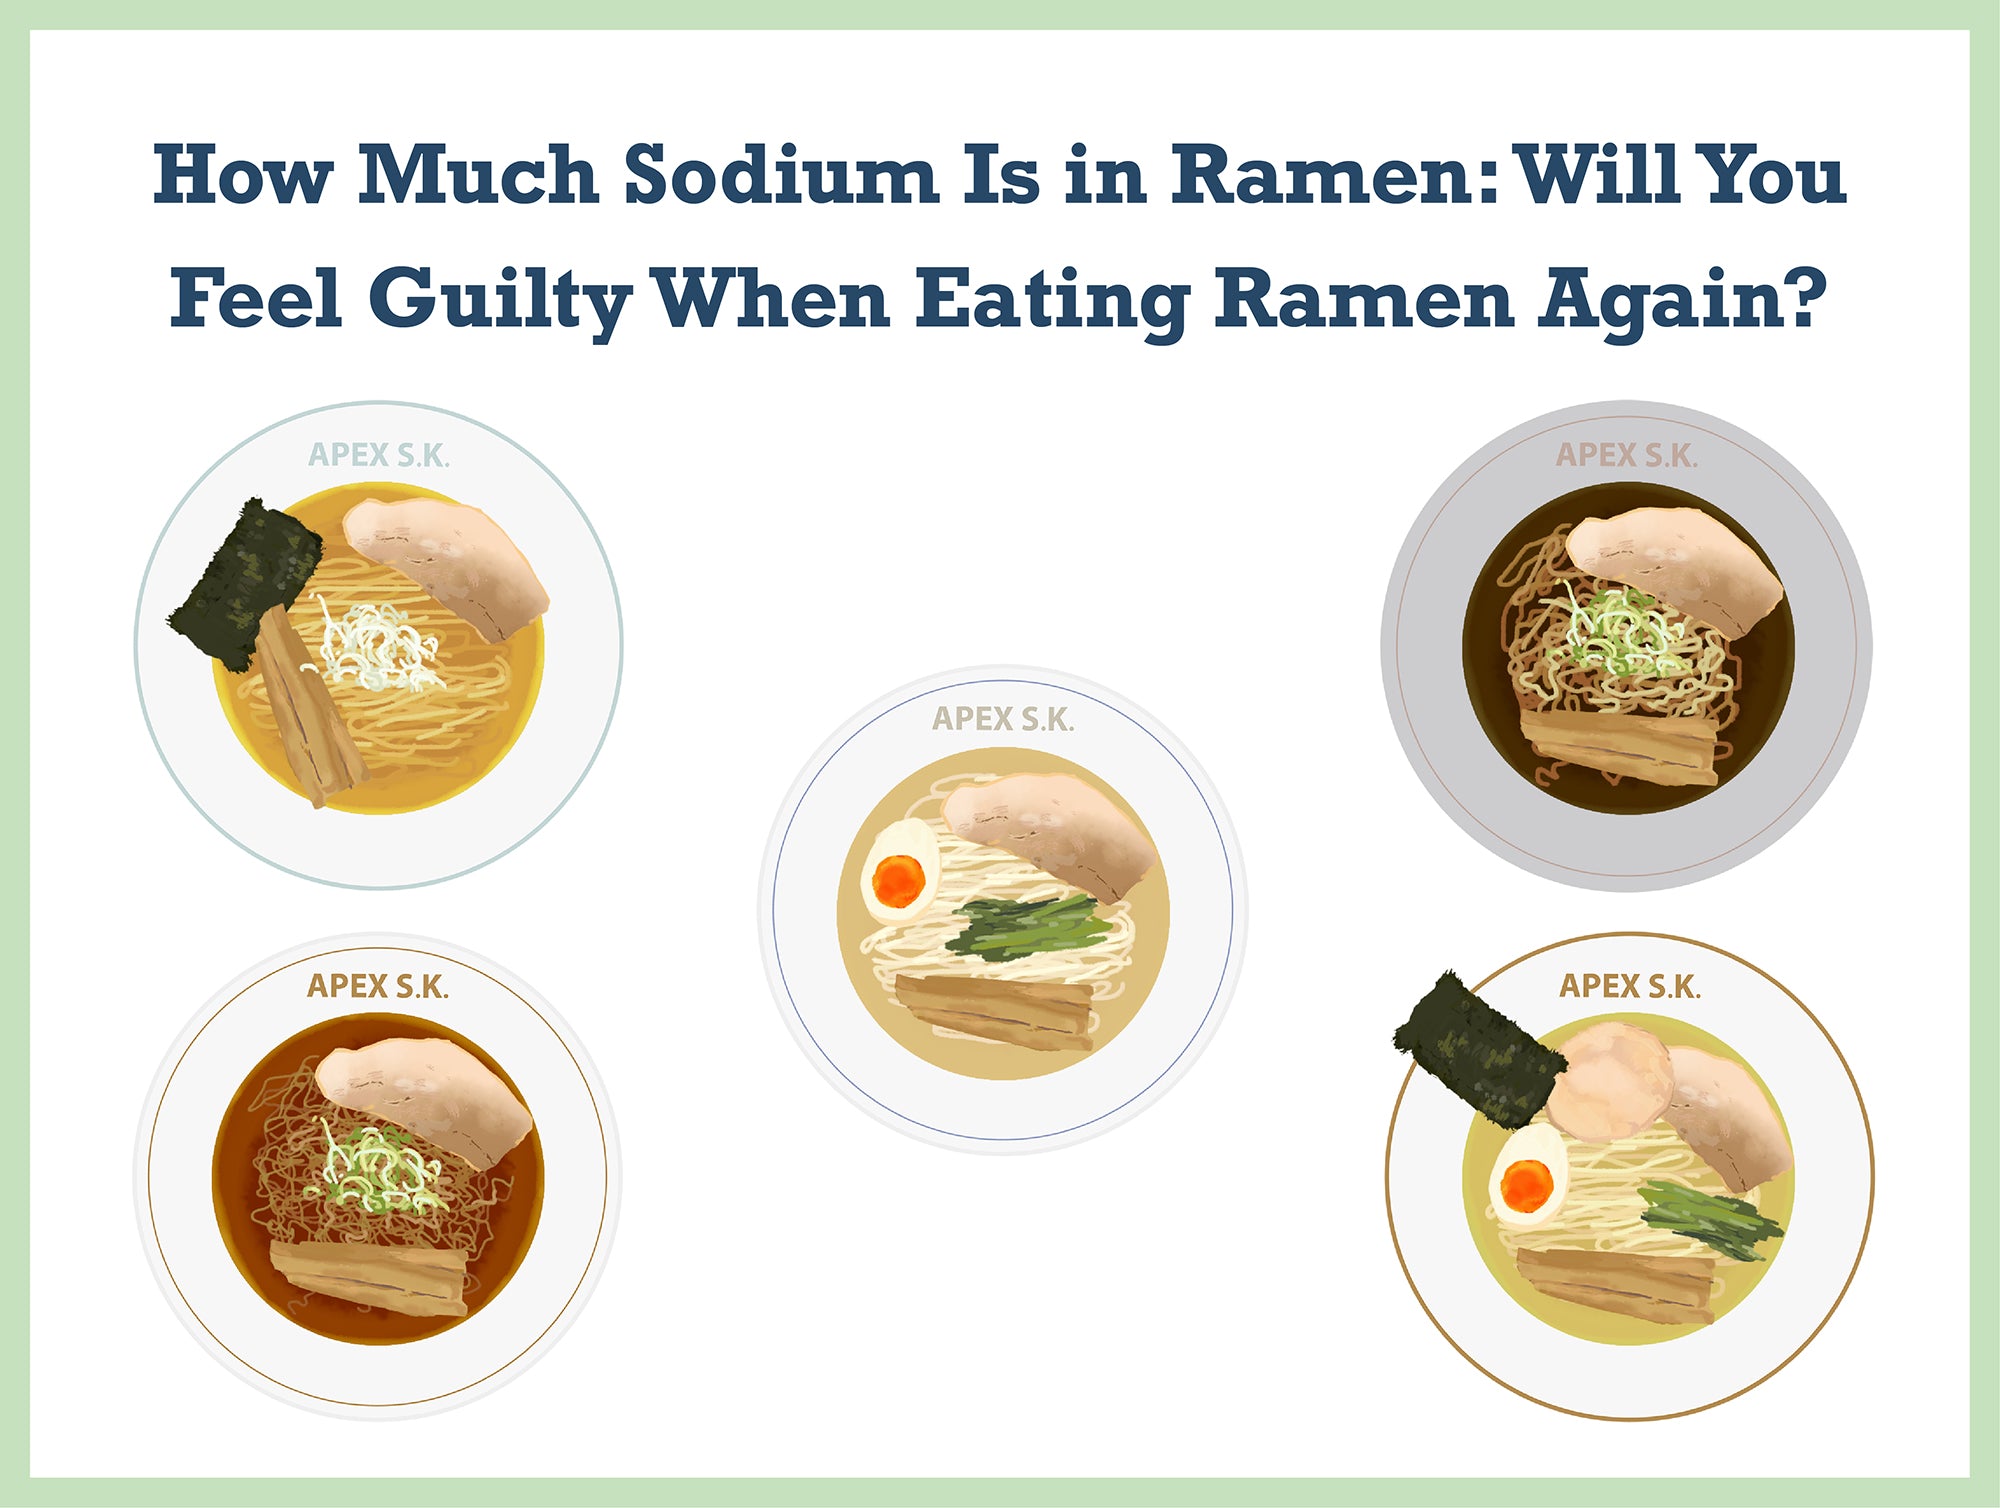 How Much Sodium Is in Ramen: Will You Feel Guilty When Eating Ramen Again?